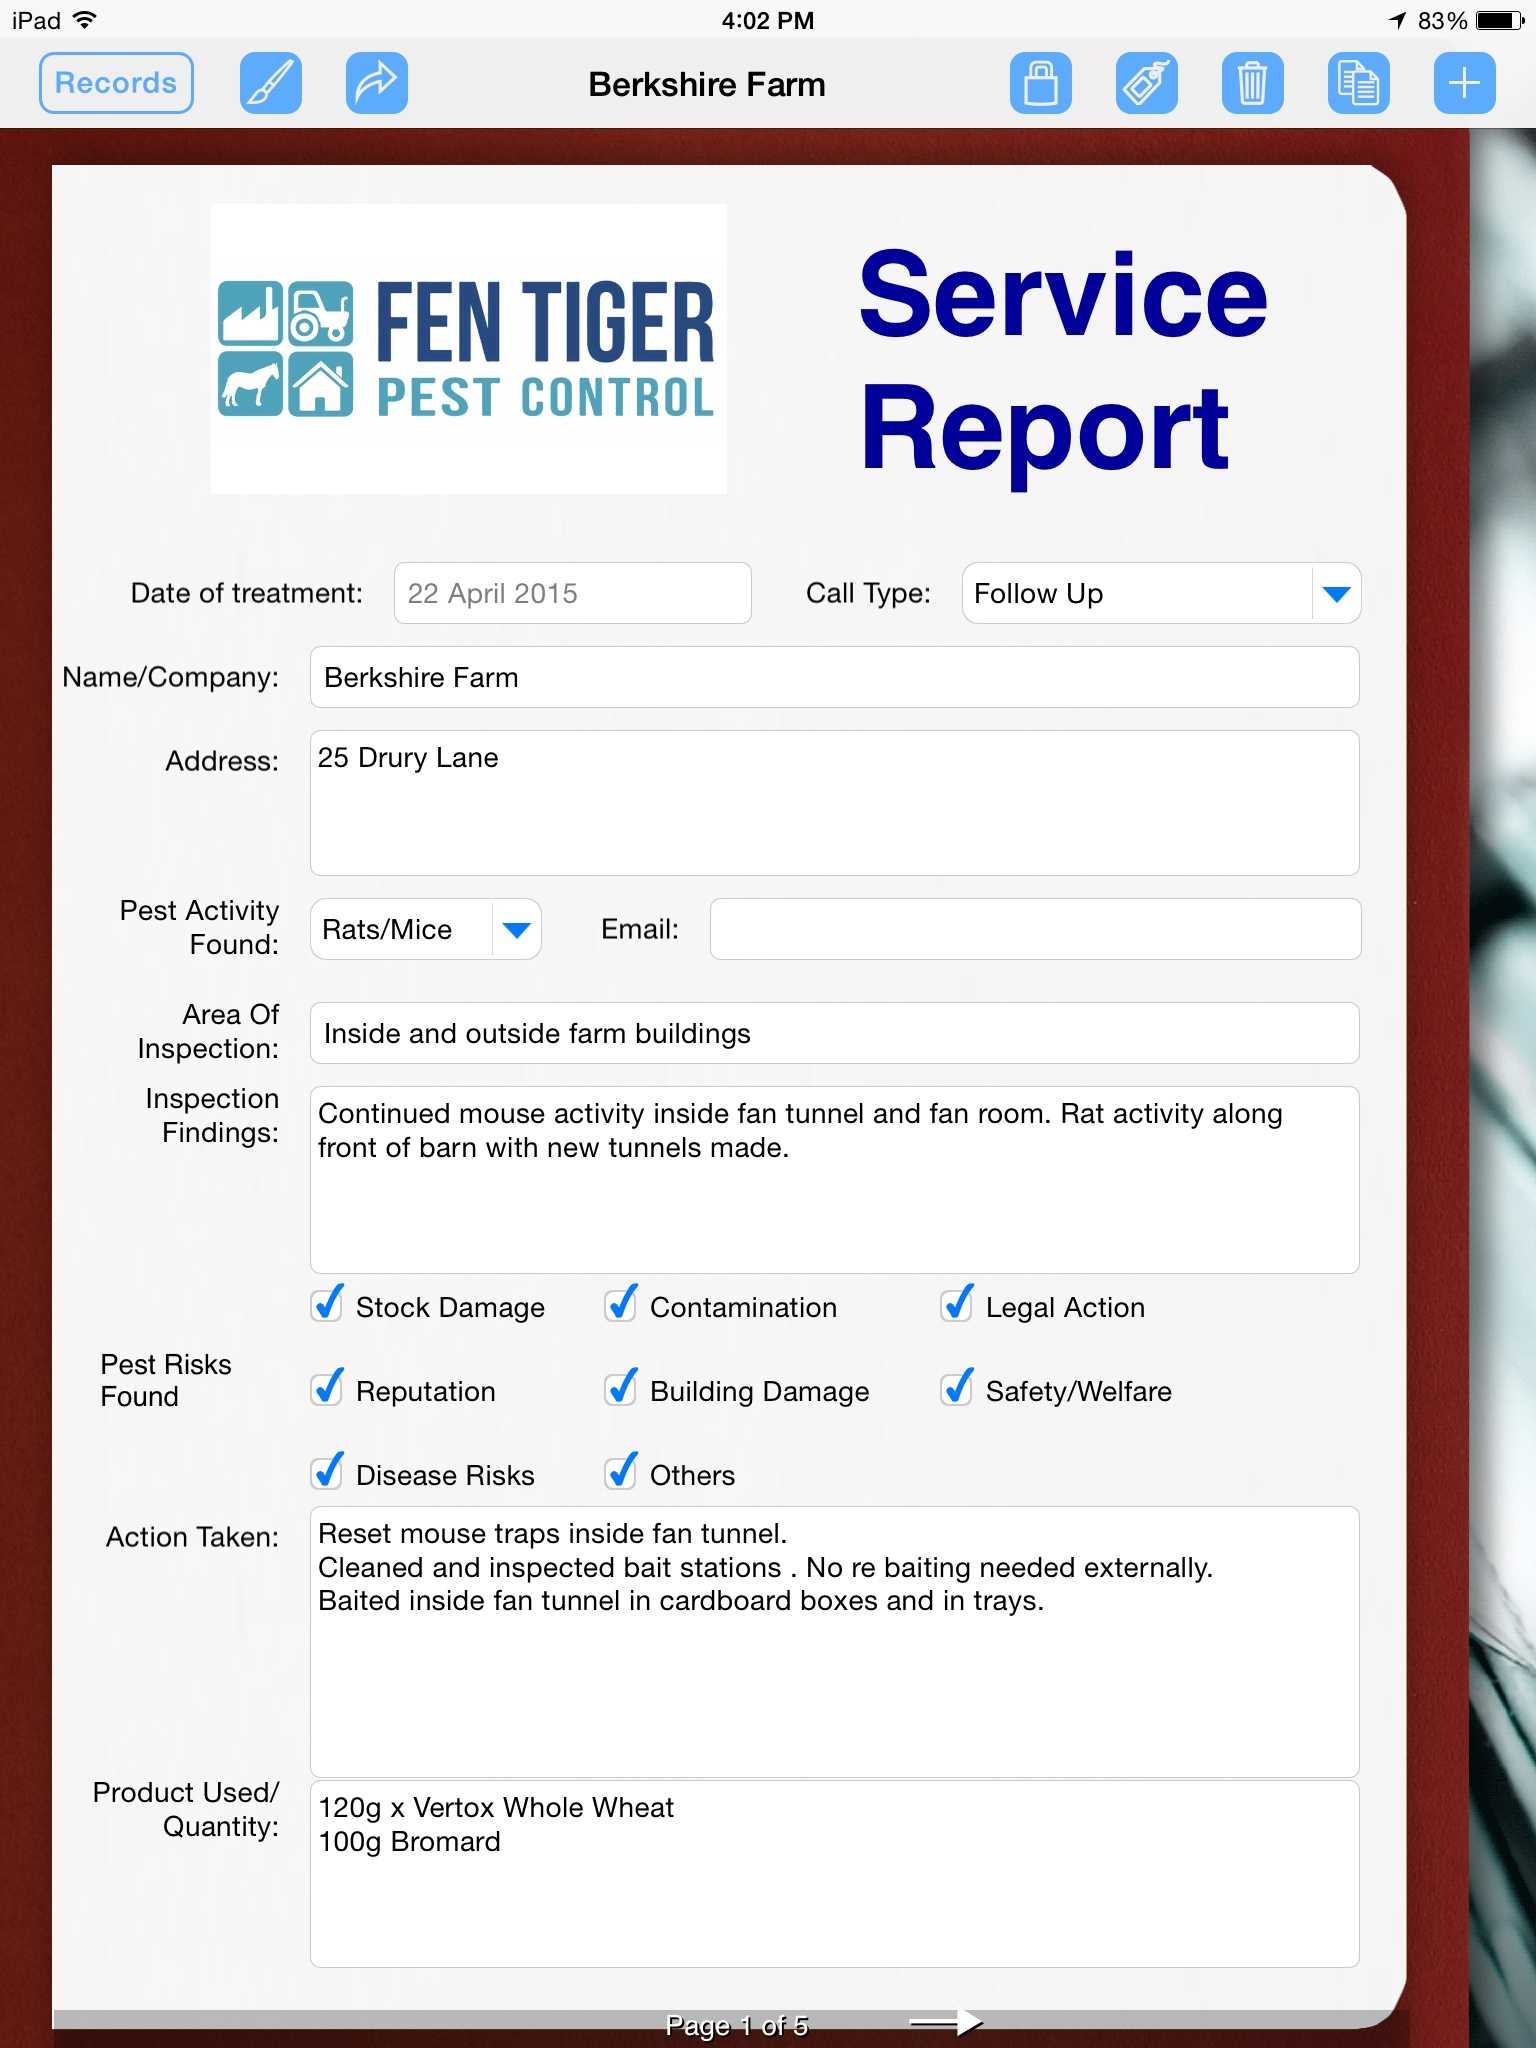 Pest Control Uses Ipad To Prepare Service Report | Form With Regard To Pest Control Inspection Report Template